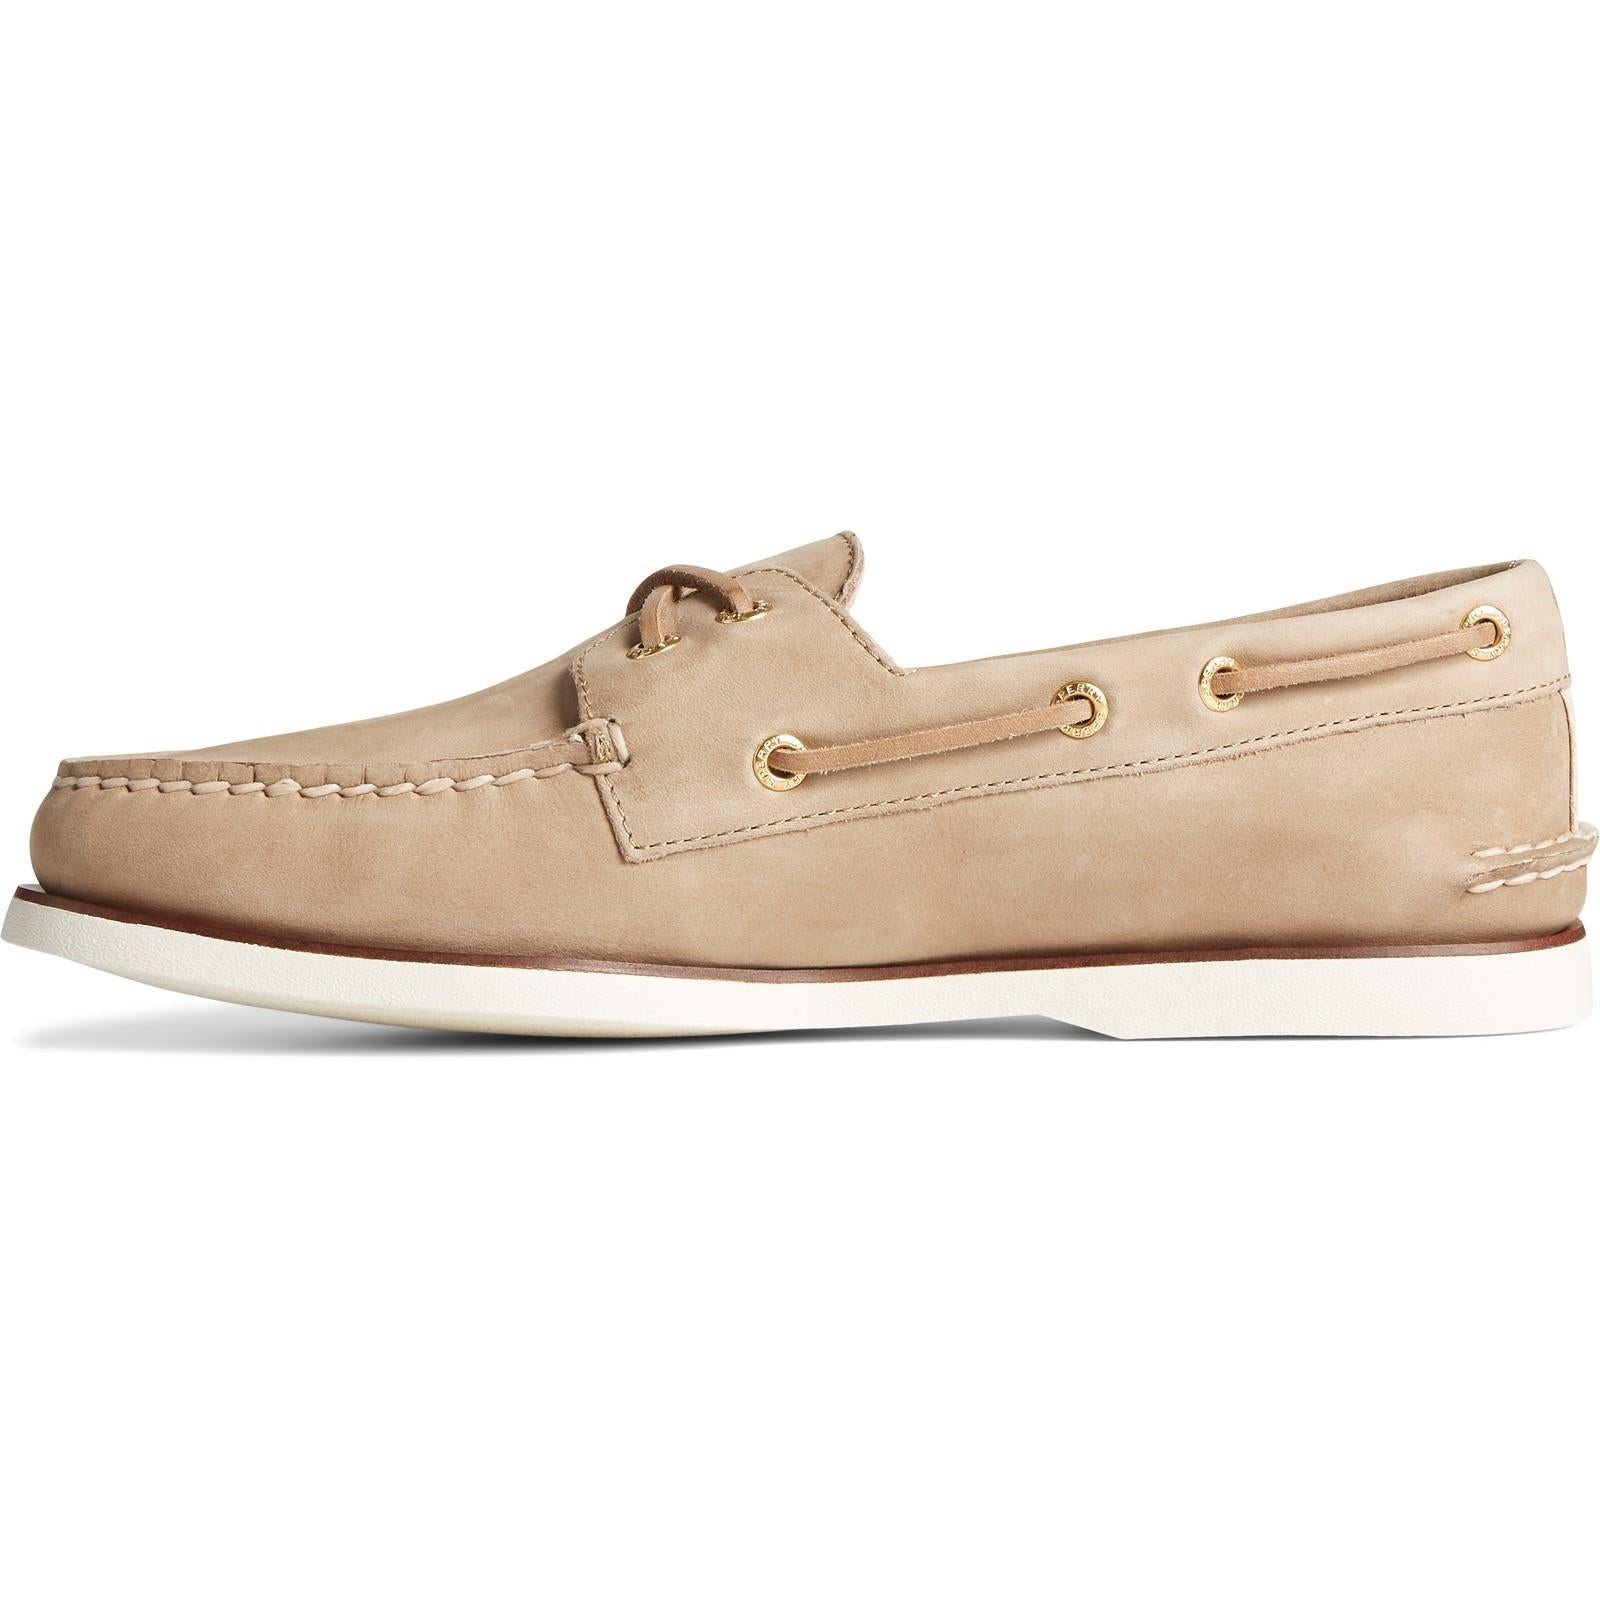 Sperry Top-sider A/O 2-EYE Boat shoe